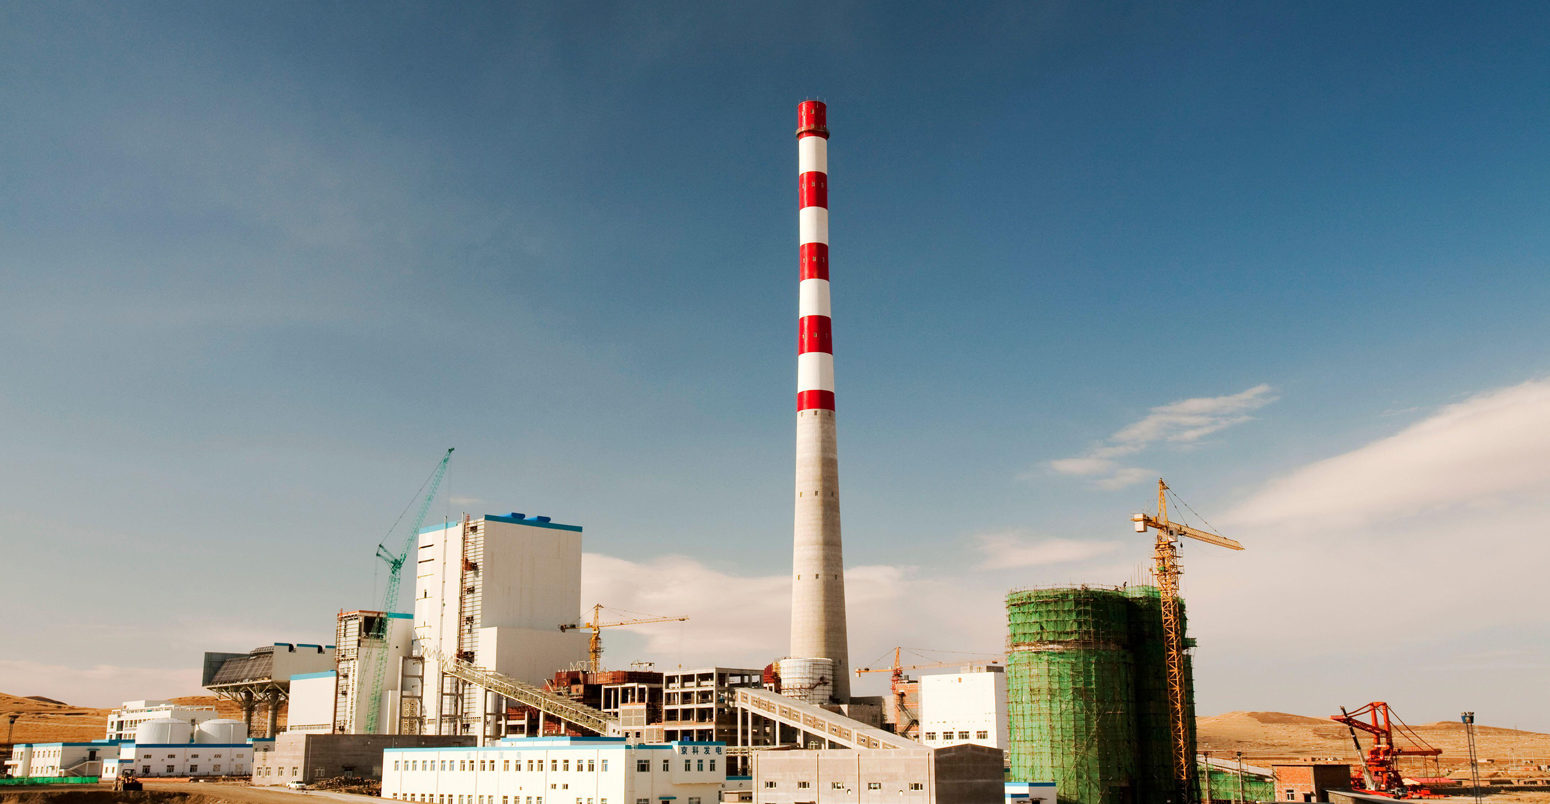 Coal fired power plant being constructed in Inner Mongolia, China. Credit: Nature Picture Library / Alamy Stock Photo